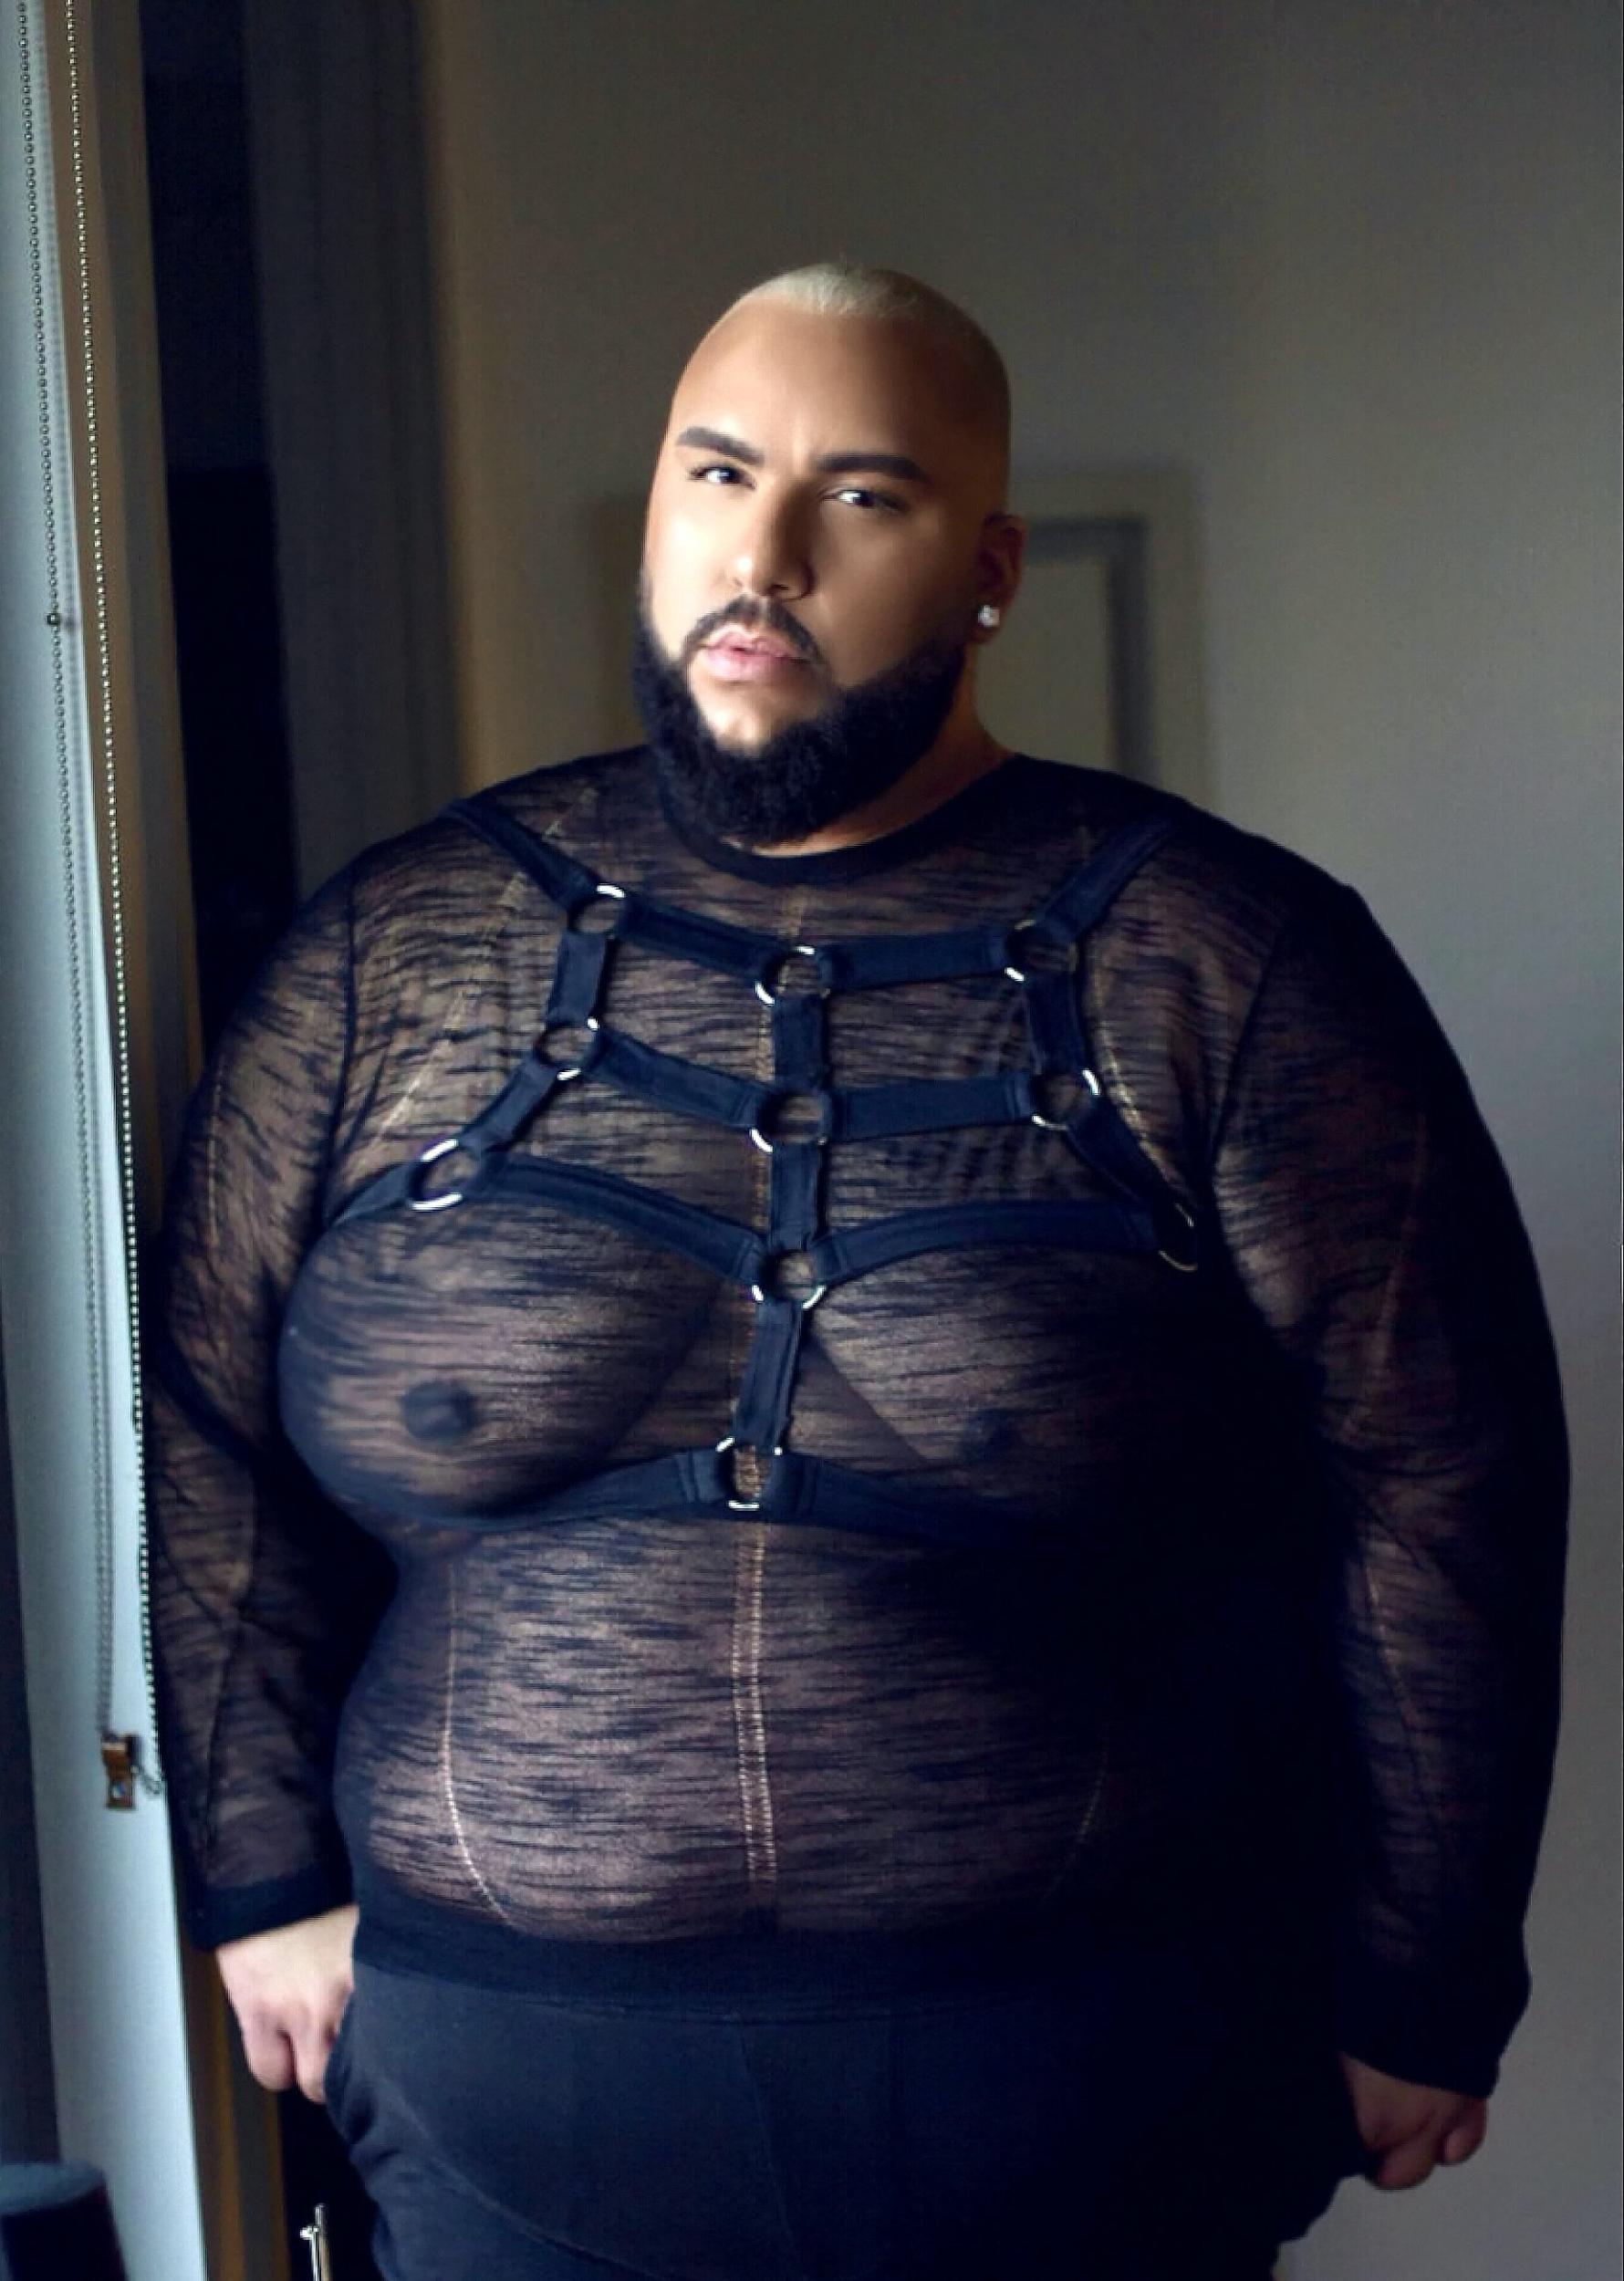 Plus-size male models recreate Calvin Klein advert to challenge beauty  standards, The Independent